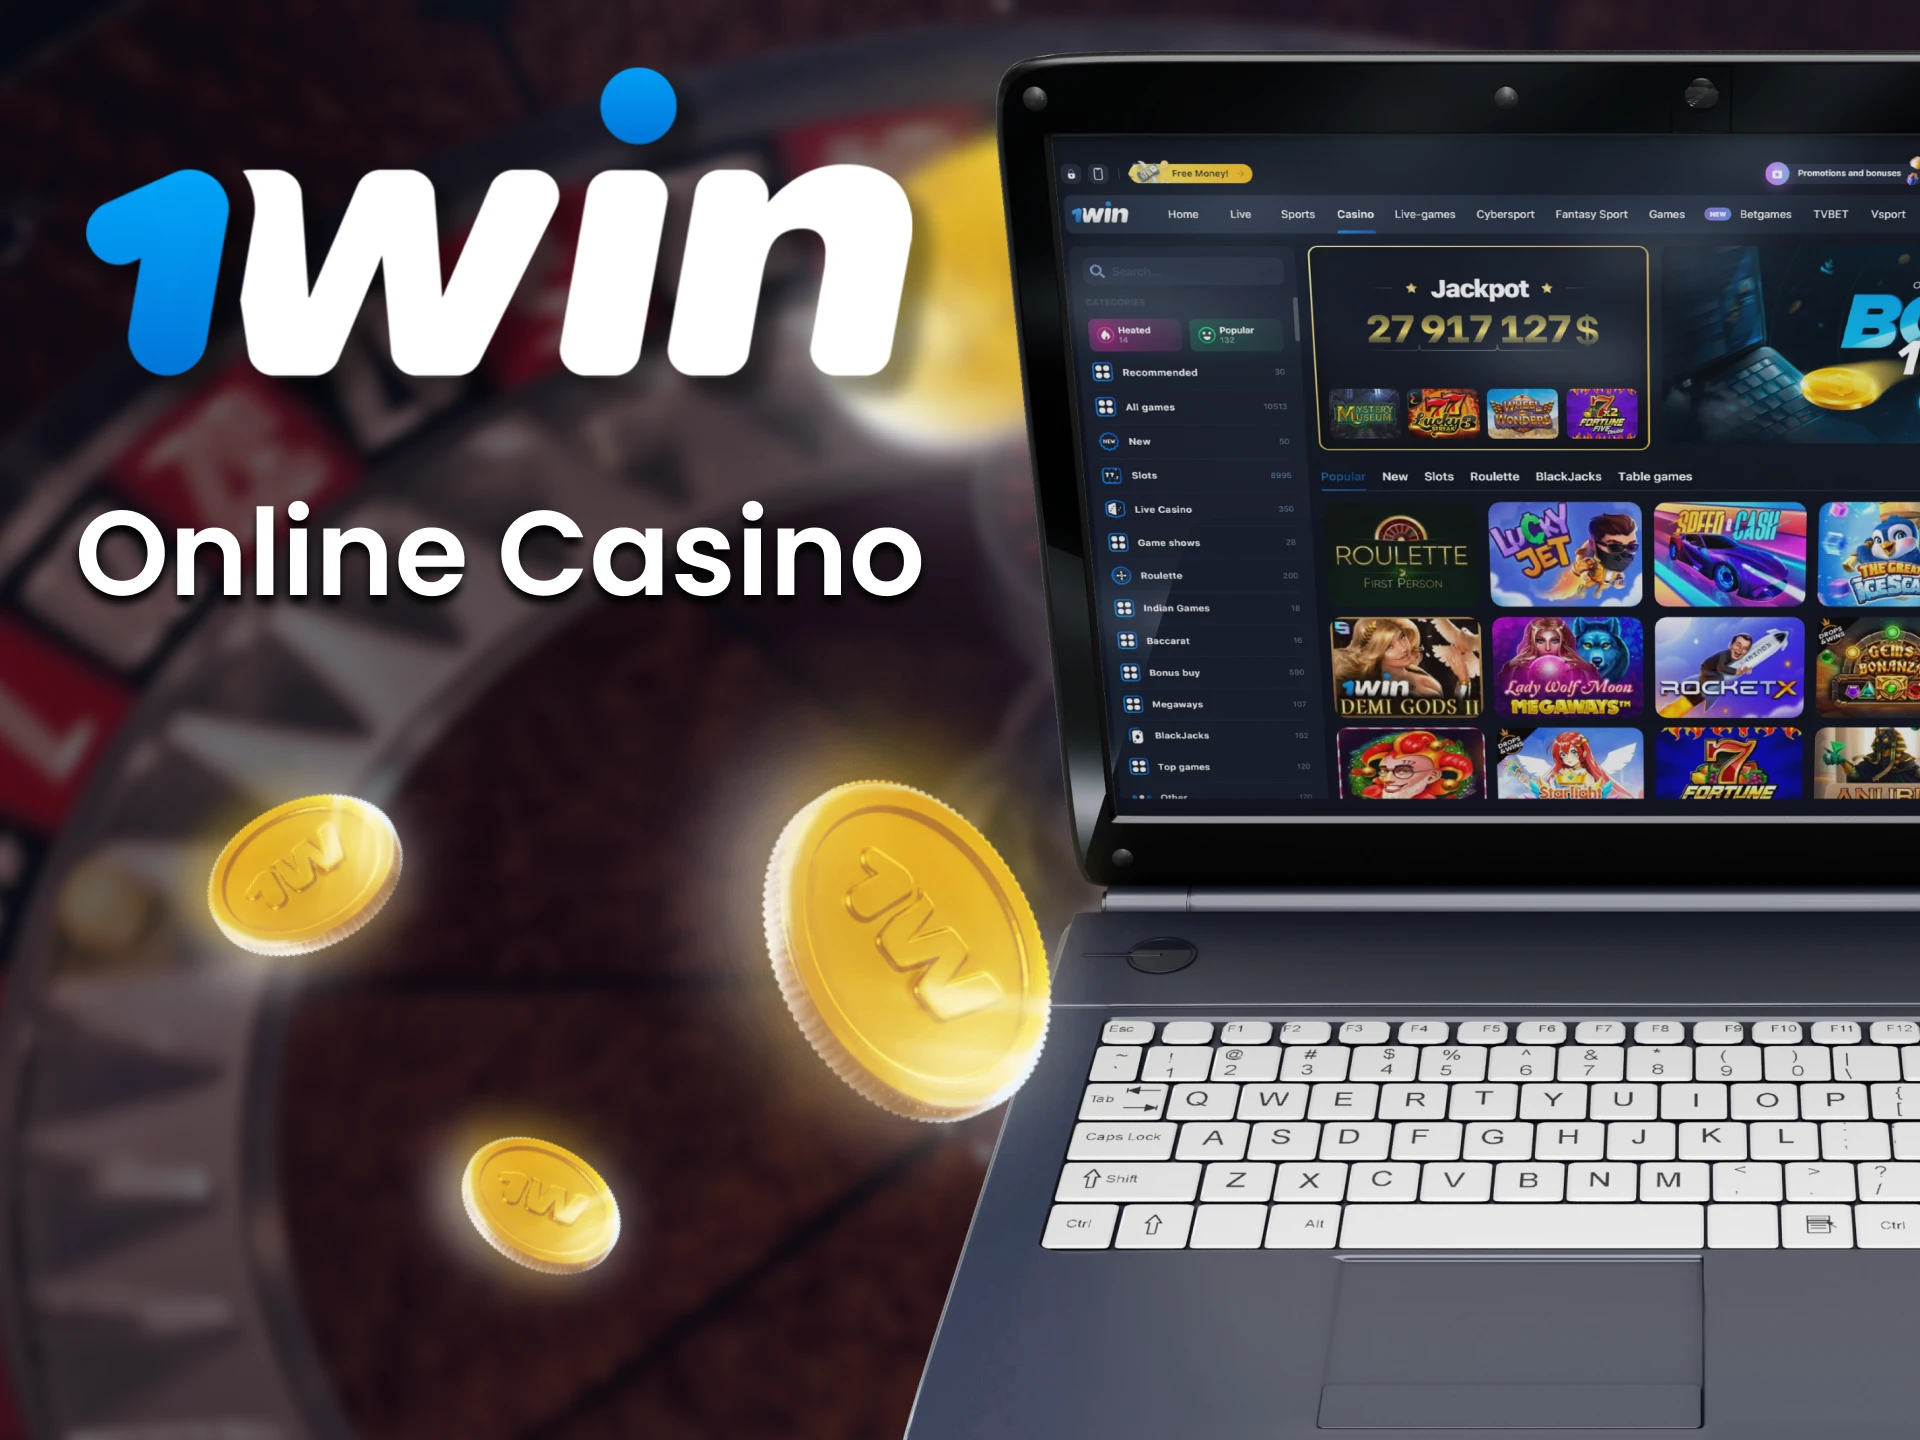 In between sports betting, play in the 1win casino.